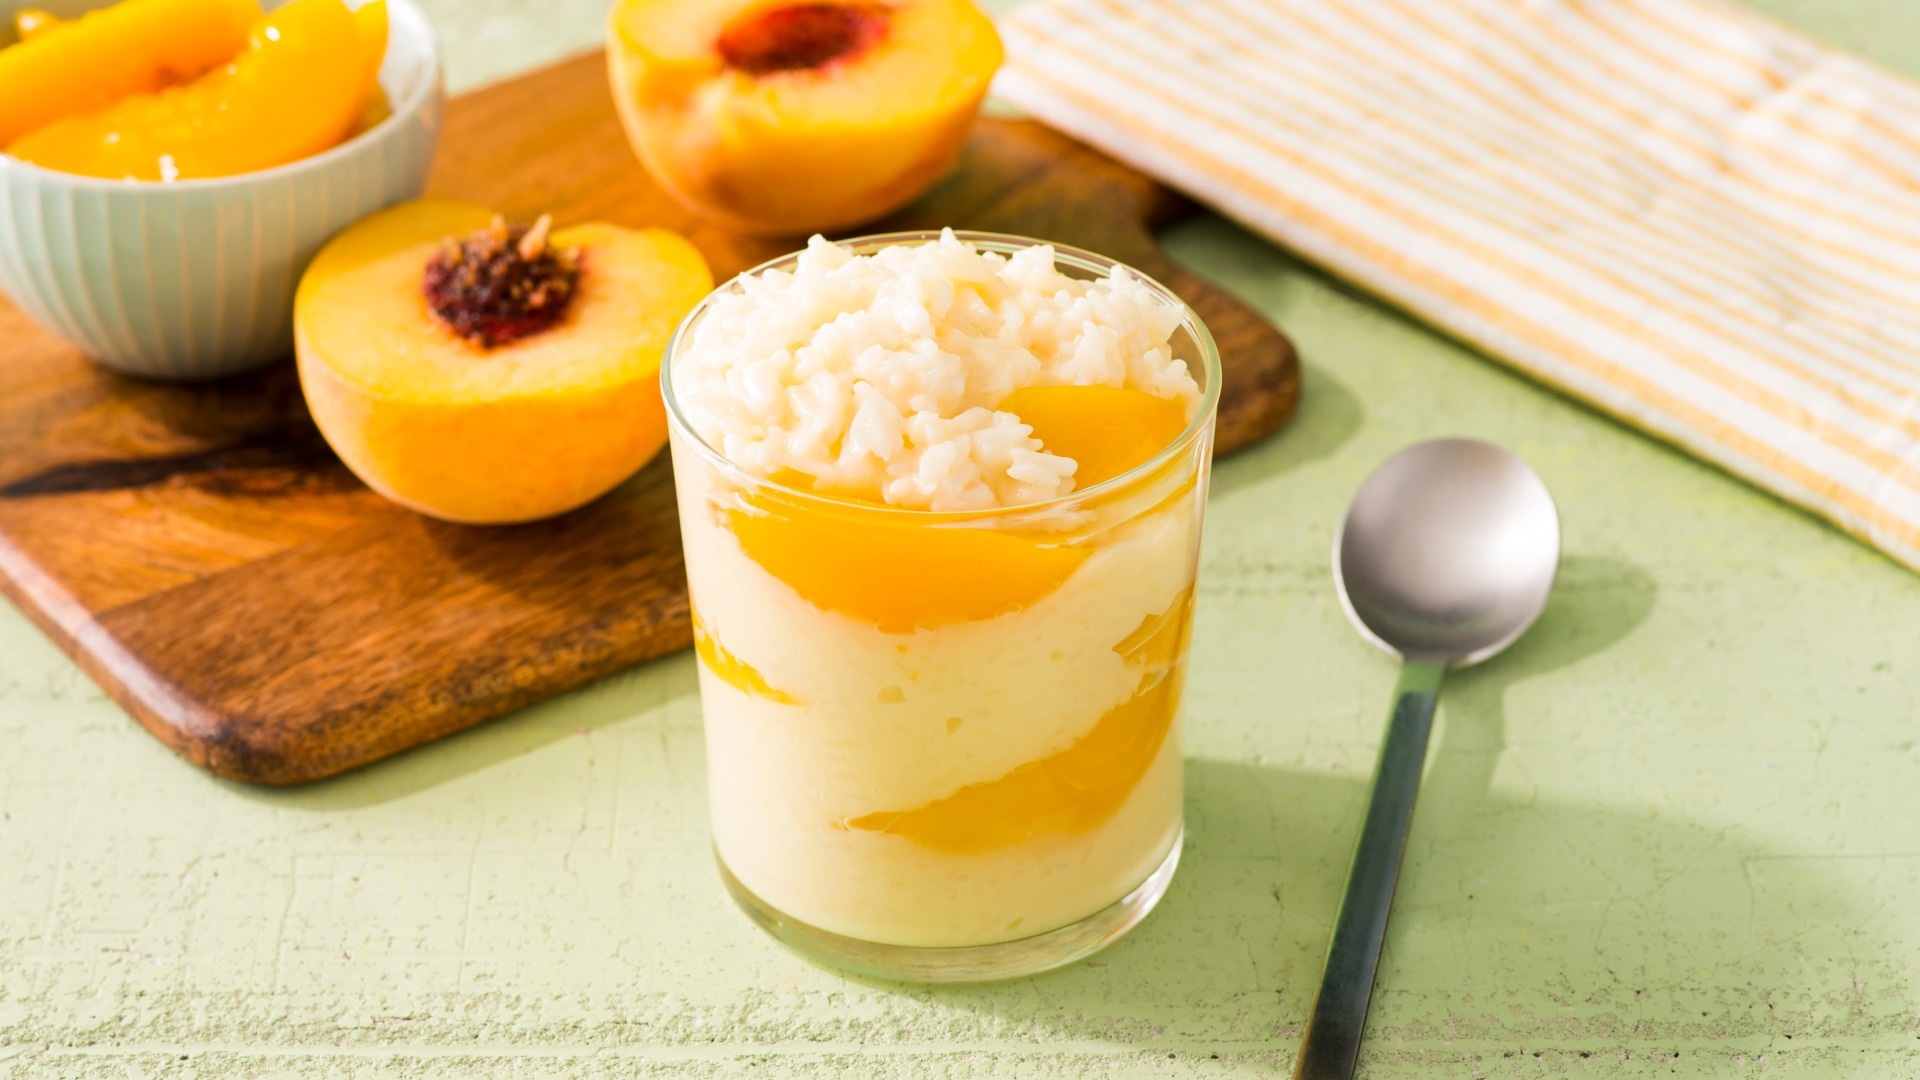 Easy peachy rice pudding, Creamy and fruity, Quick and simple recipe, Perfect dessert for summer, 1920x1080 Full HD Desktop